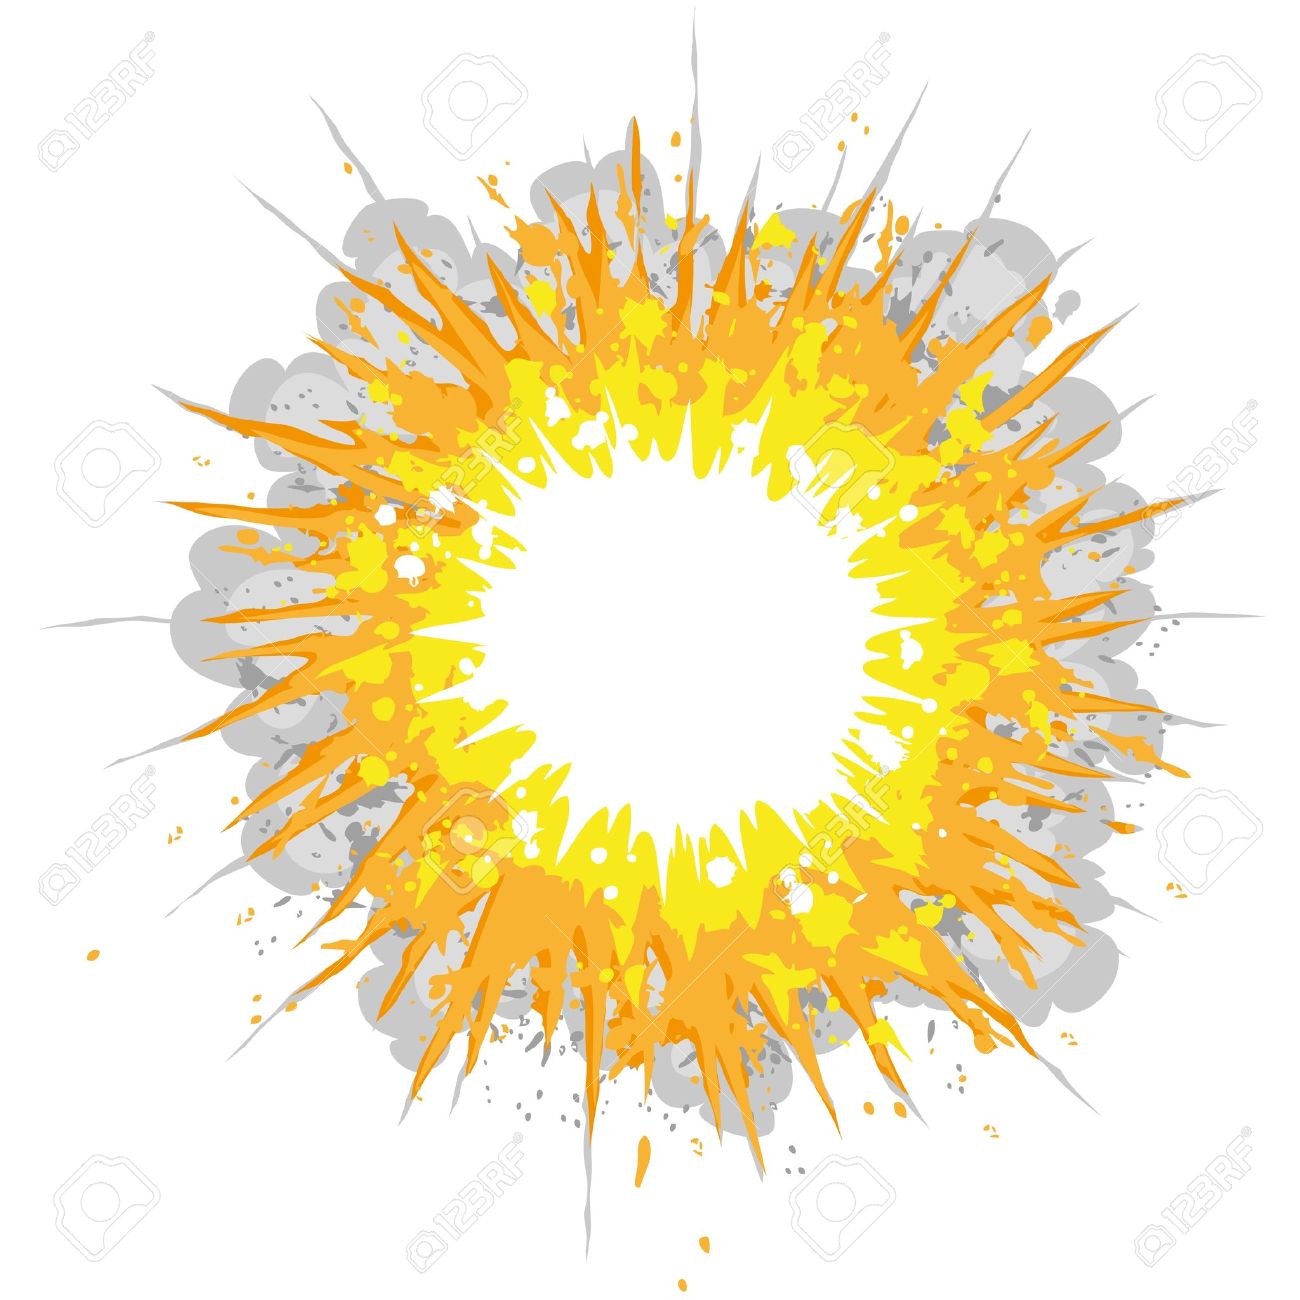 Explosion clipart #12, Download drawings